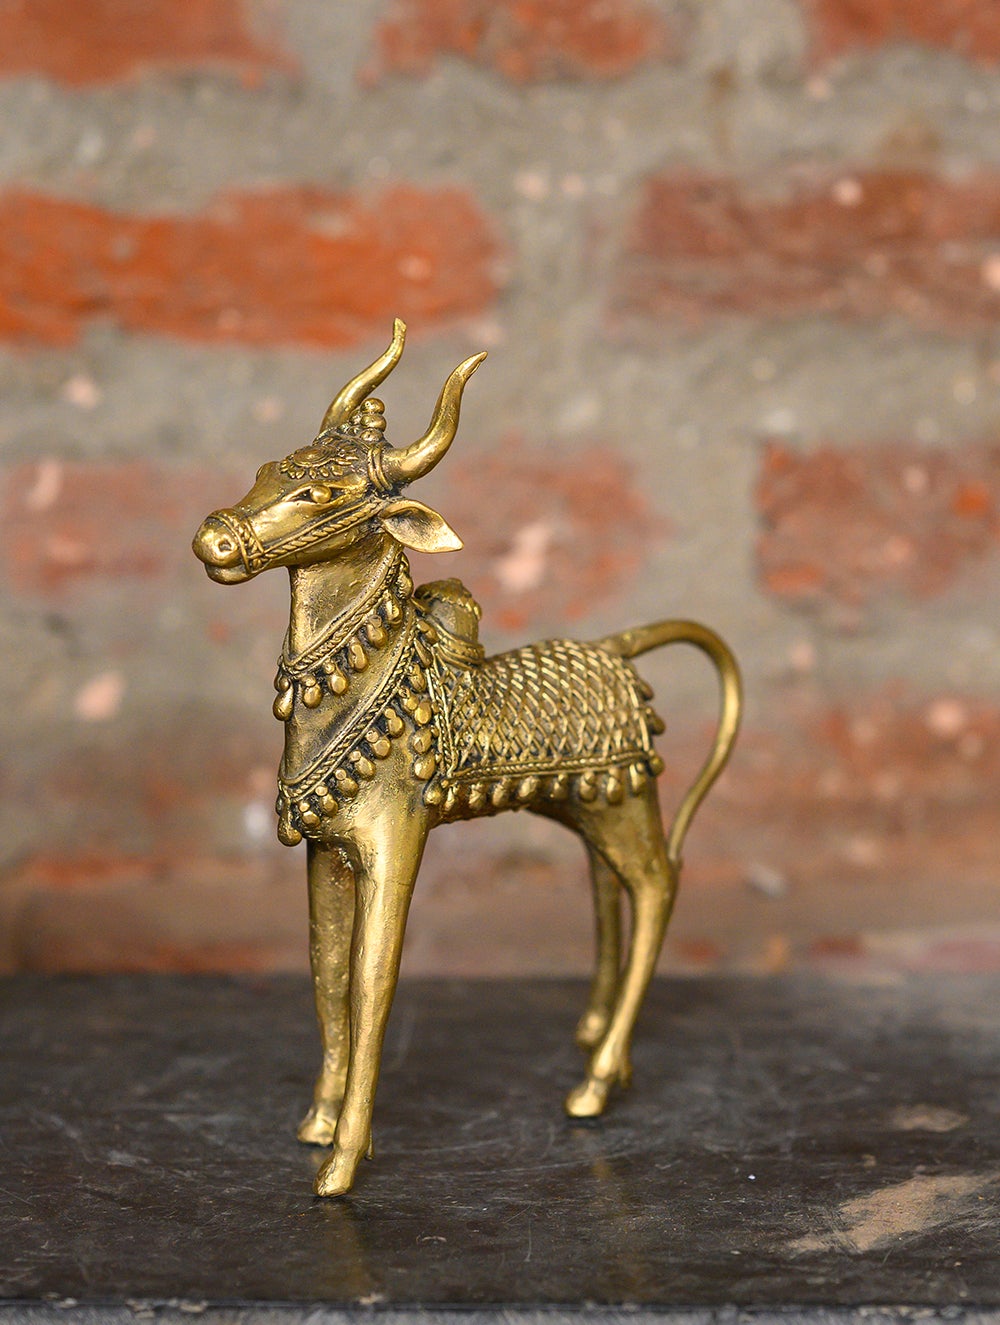 Load image into Gallery viewer, Dhokra Craft Curio - The Ornate Horse